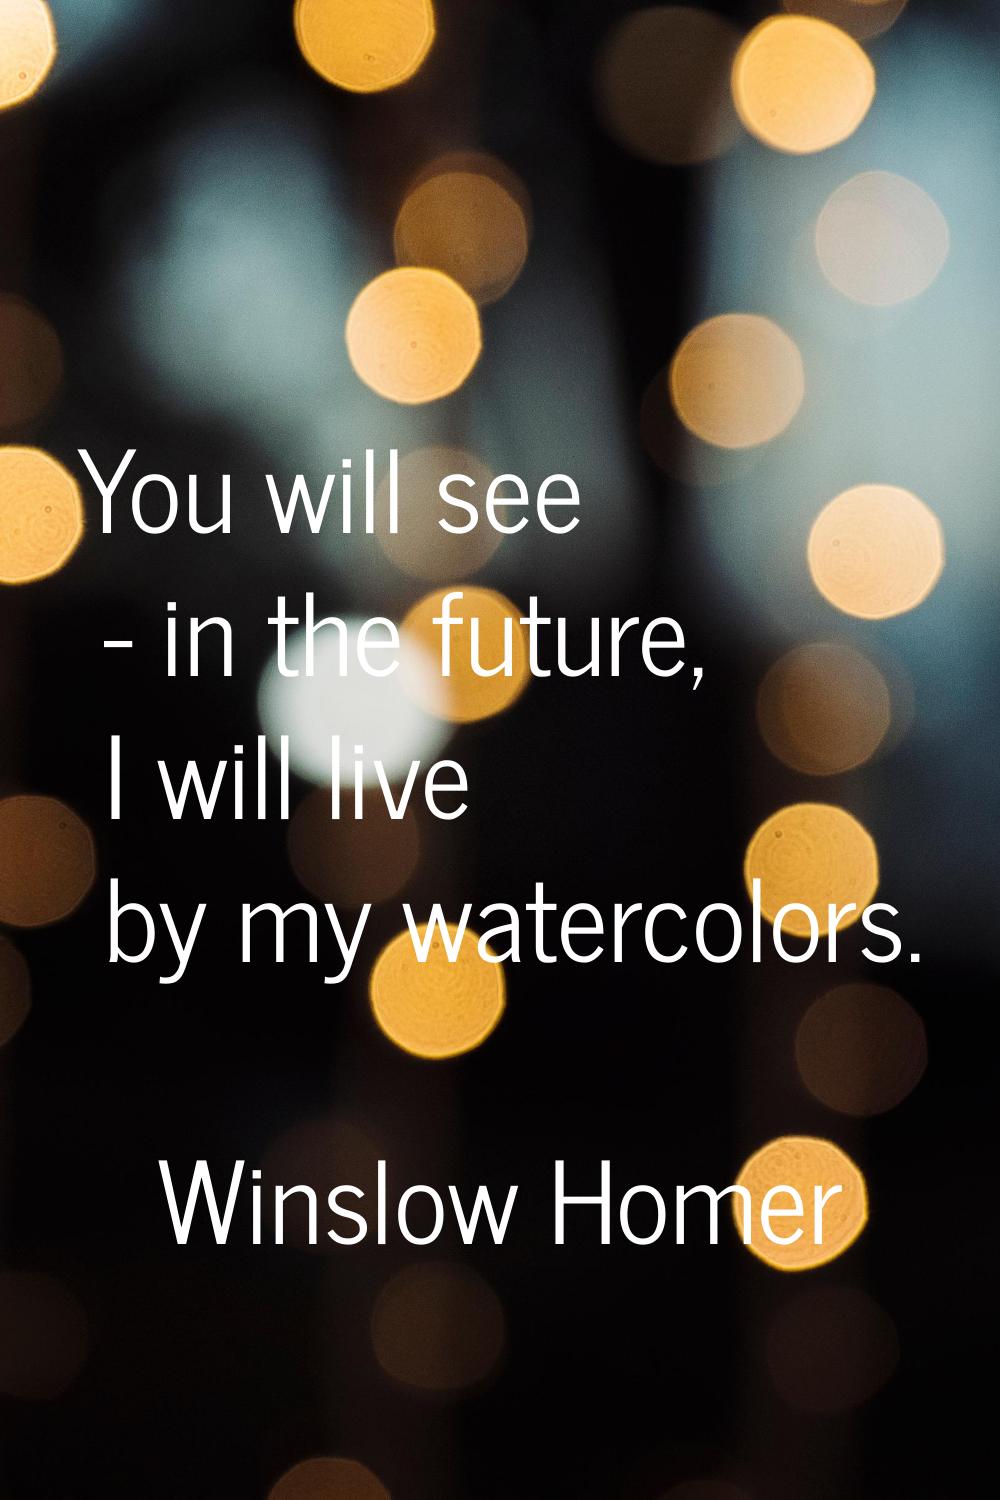 You will see - in the future, I will live by my watercolors.